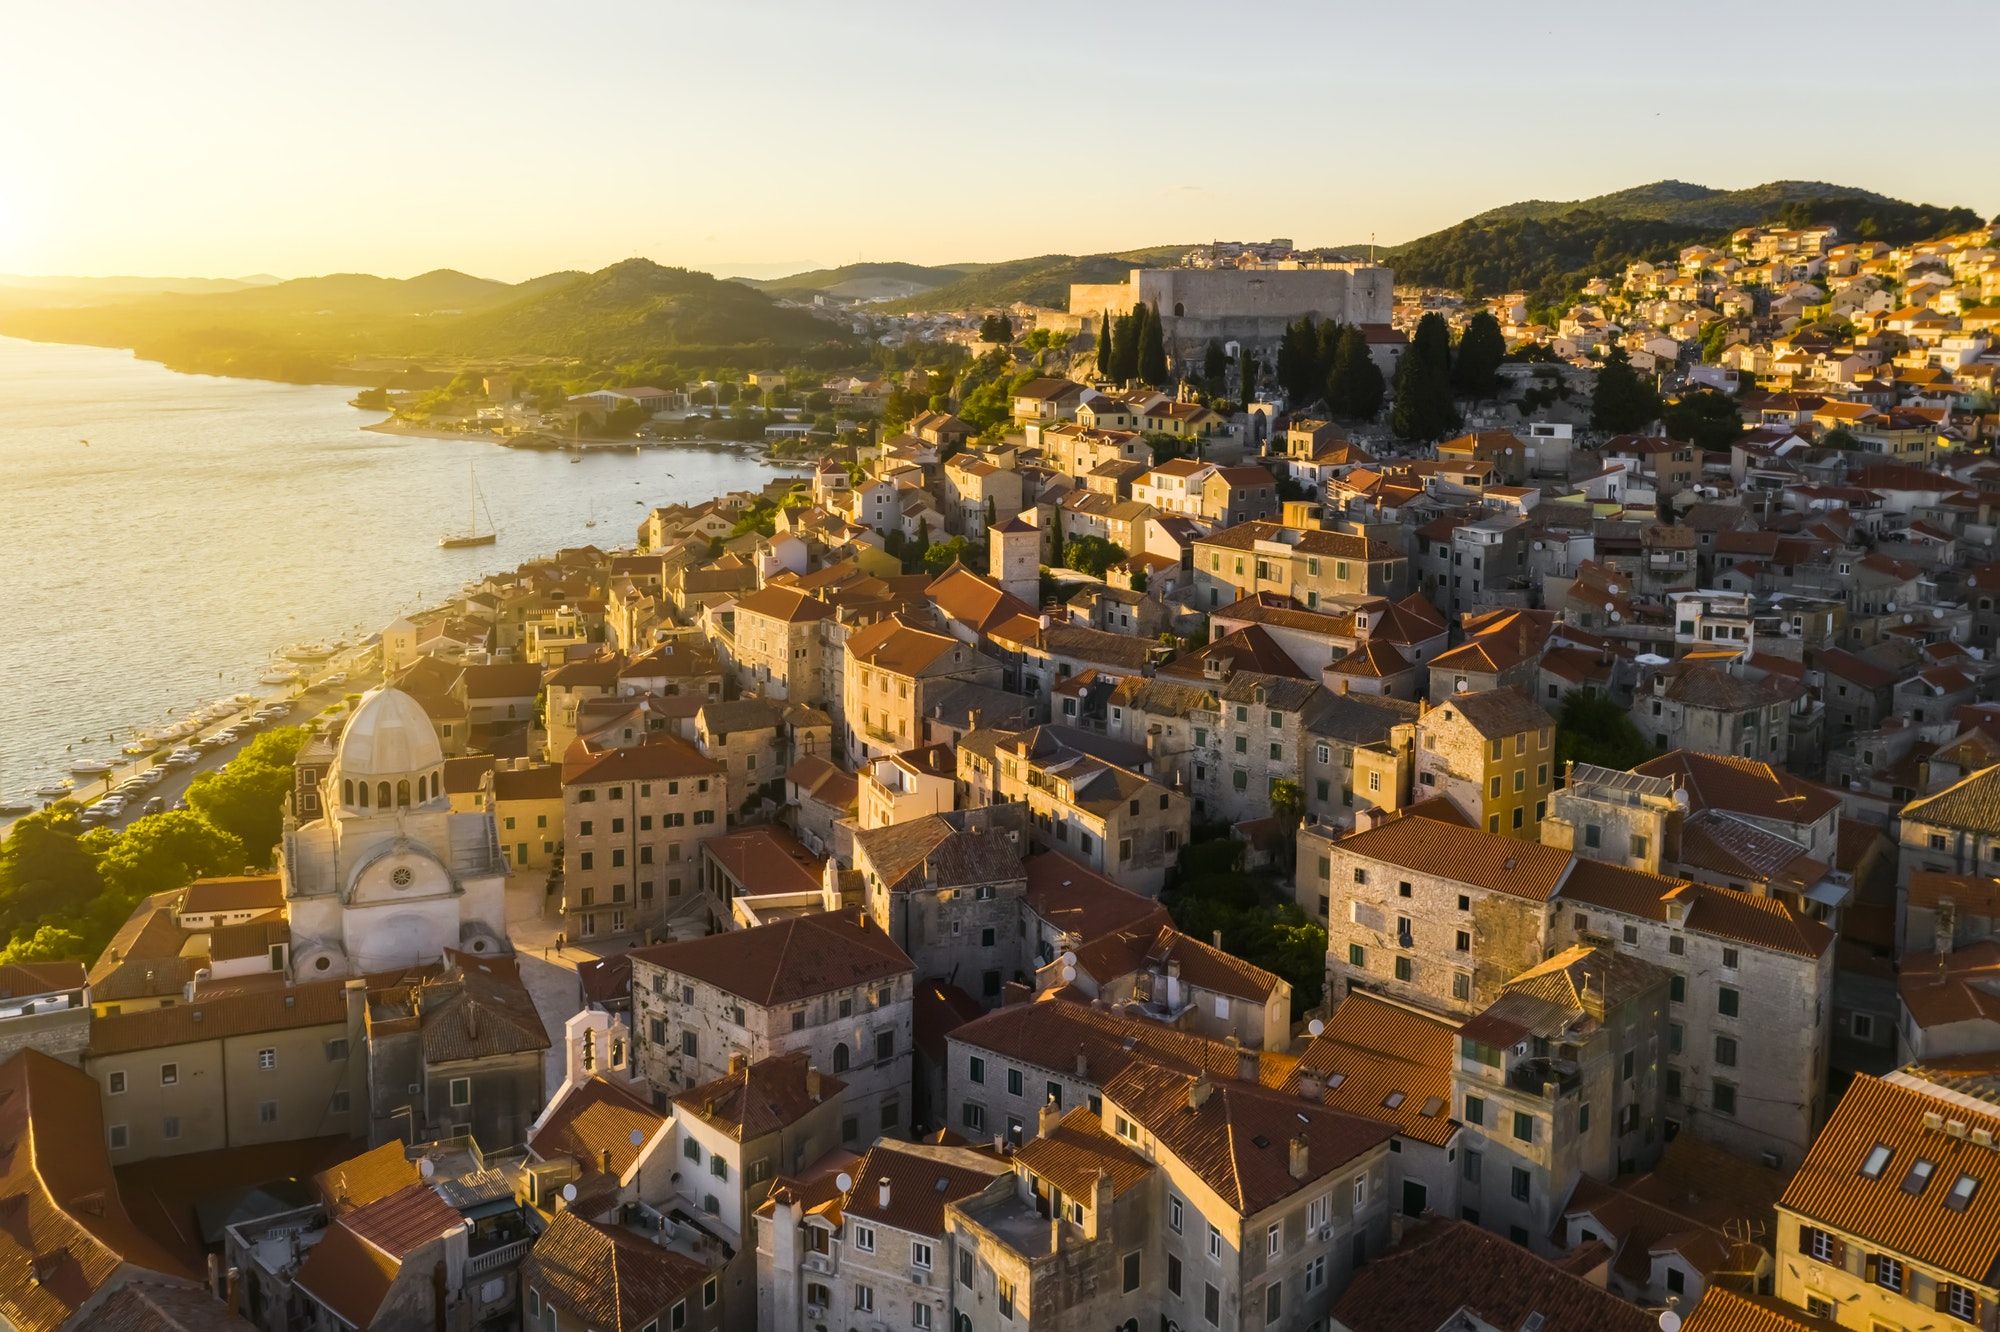 Beautiful old city of Sibenik, aerial view of the town center at sunset. Croatia.